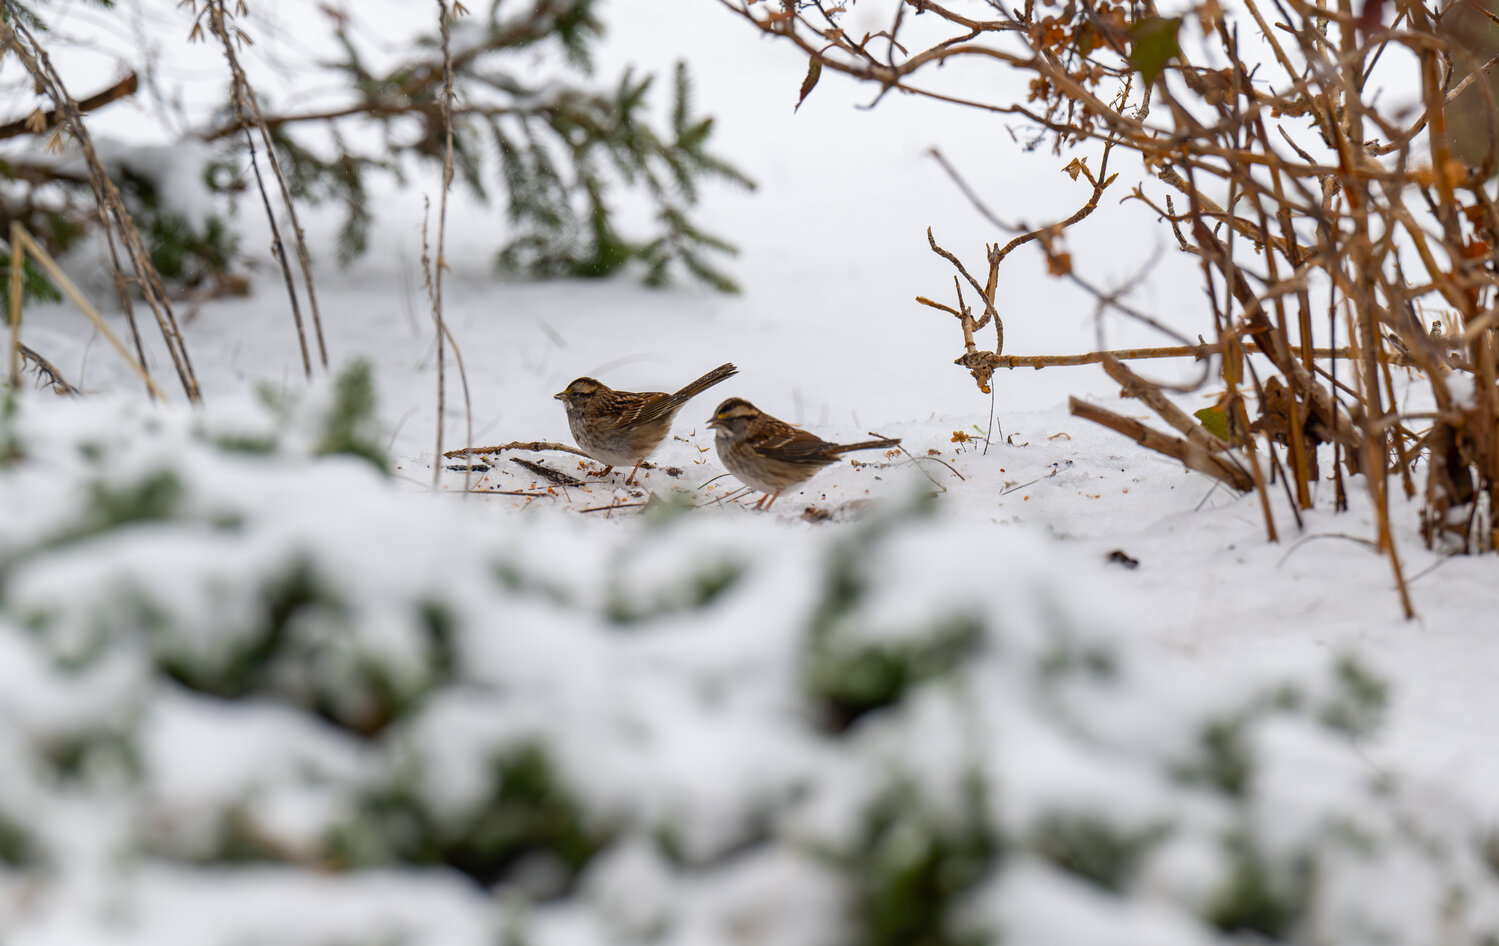 Sparrows opt for the seed that’s fallen to the snowy ground below the feeder.